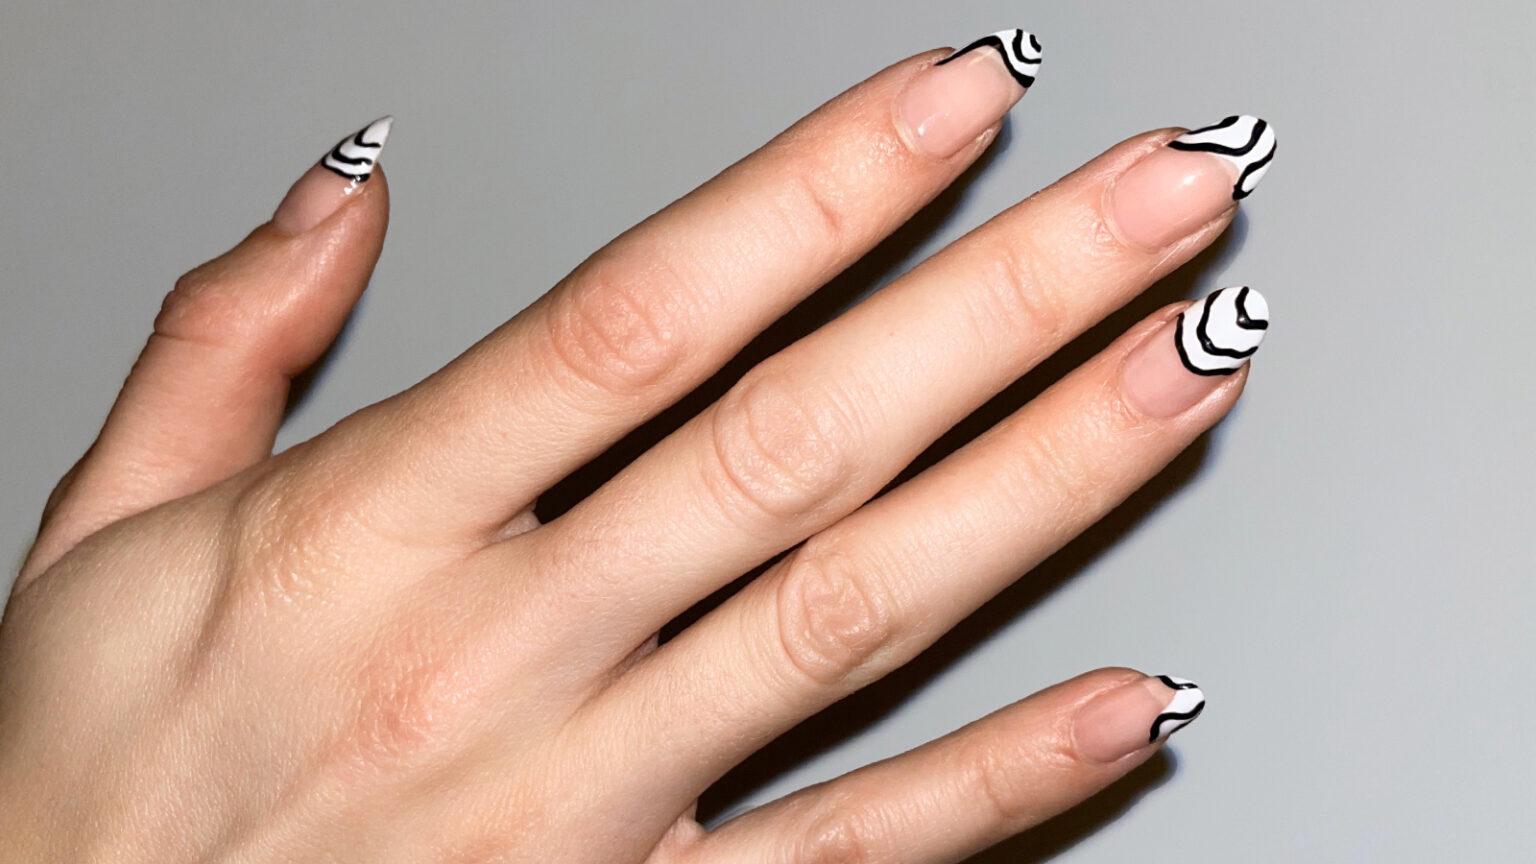 1. "Easy Black and White Nail Design Tutorial" - wide 5